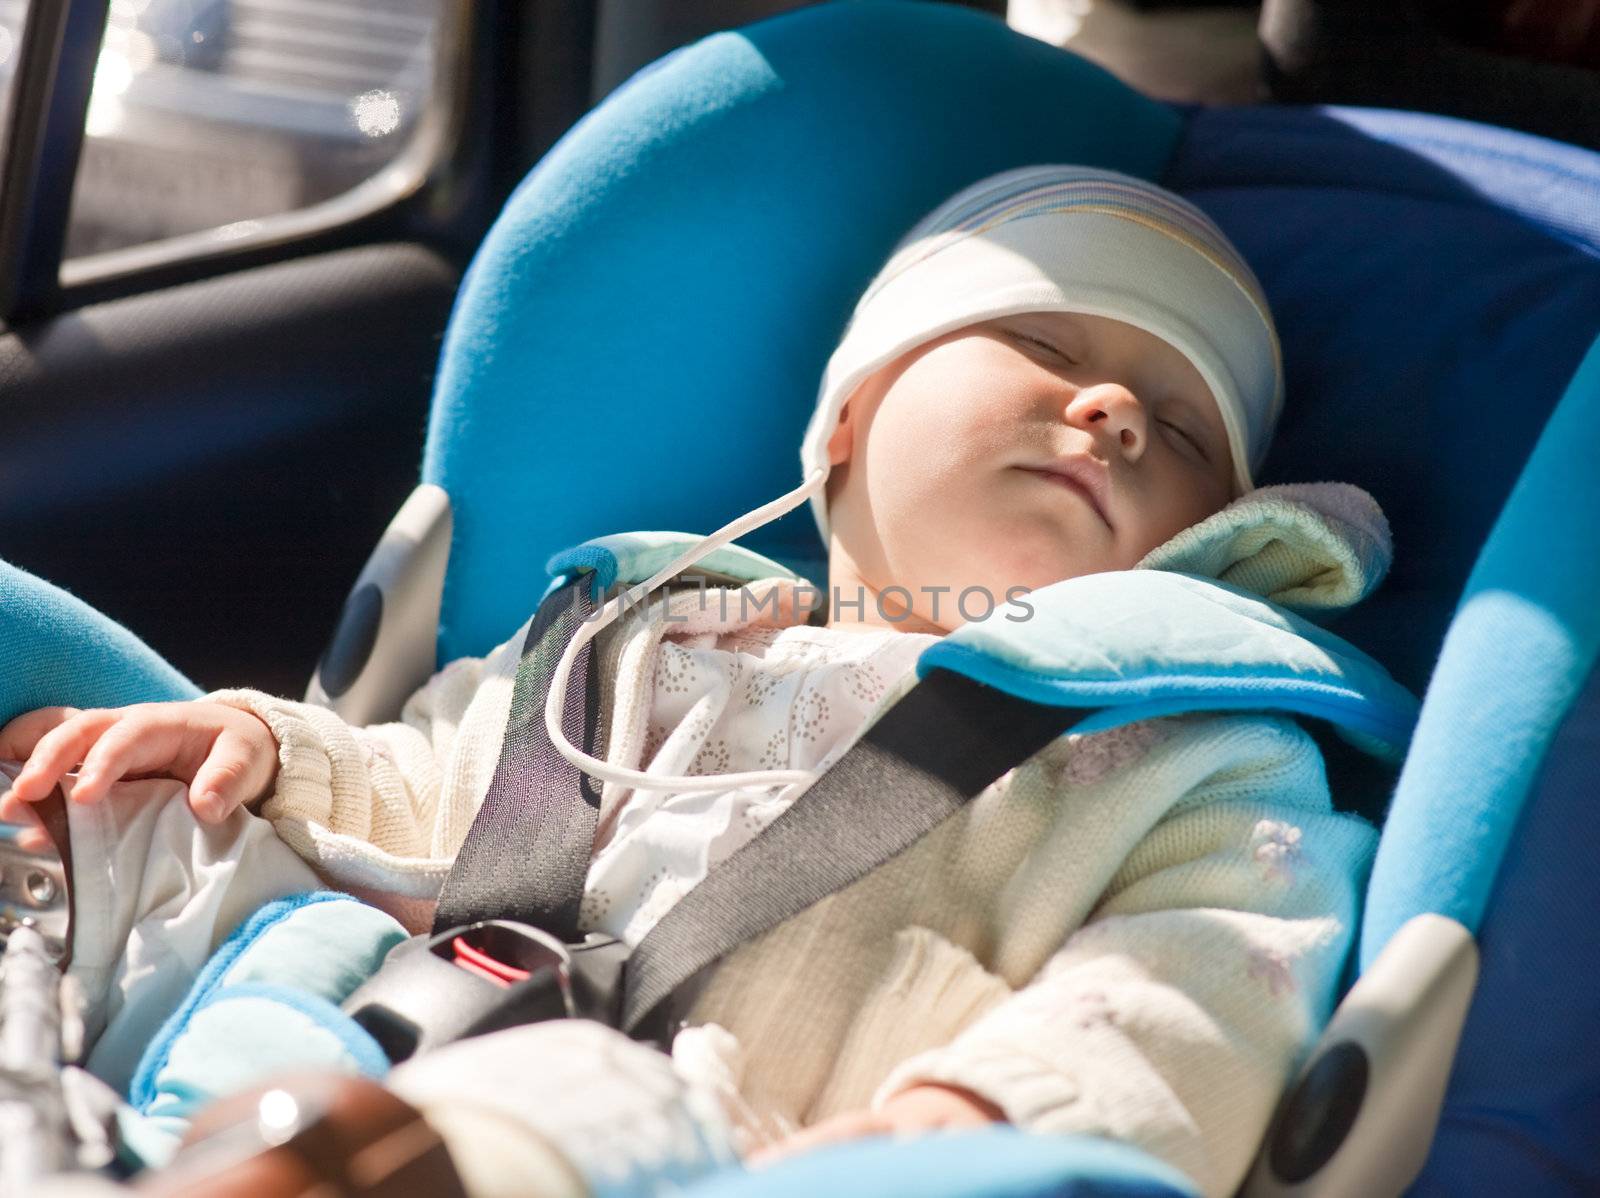 Toddler in a car seat by naumoid